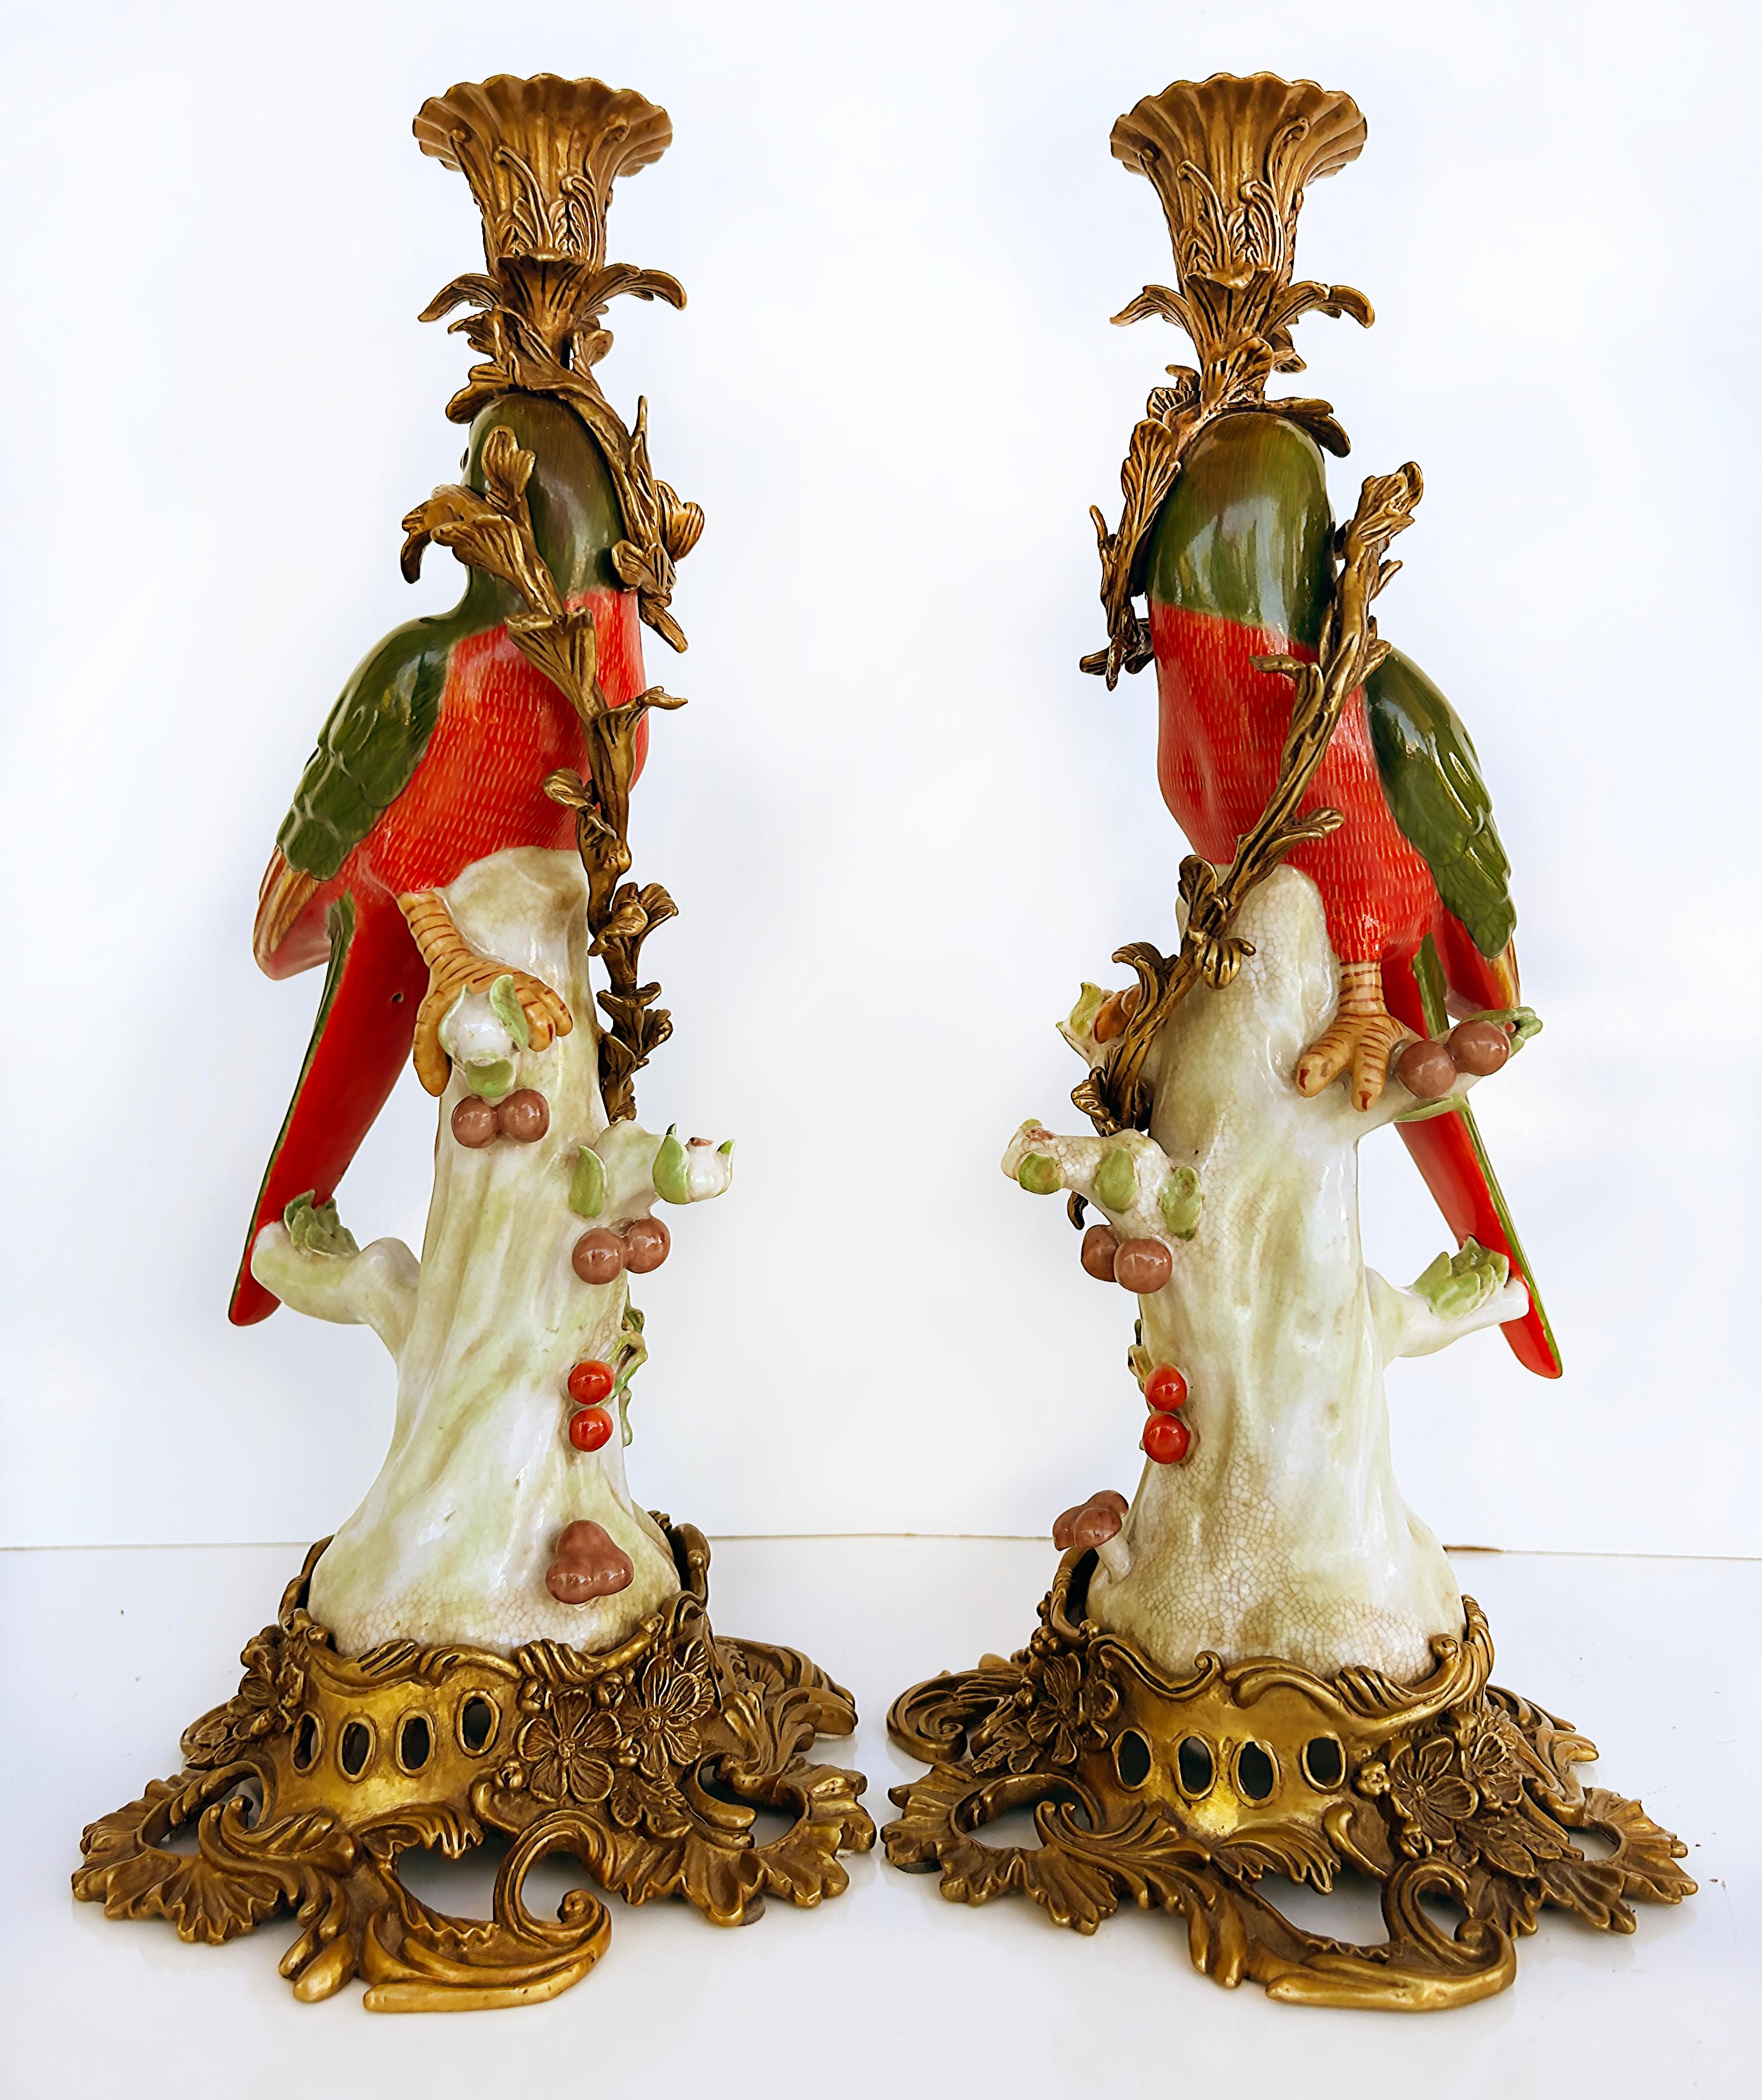 Vintage Bronze Painted Porcelain Exotic Bird Candlesticks, Pair

Offered for sale is a pair of hand painted porcelain bird candlesticks with craquelure glazes and painted gilt details which are presented on ornate bronze bases. The pair of